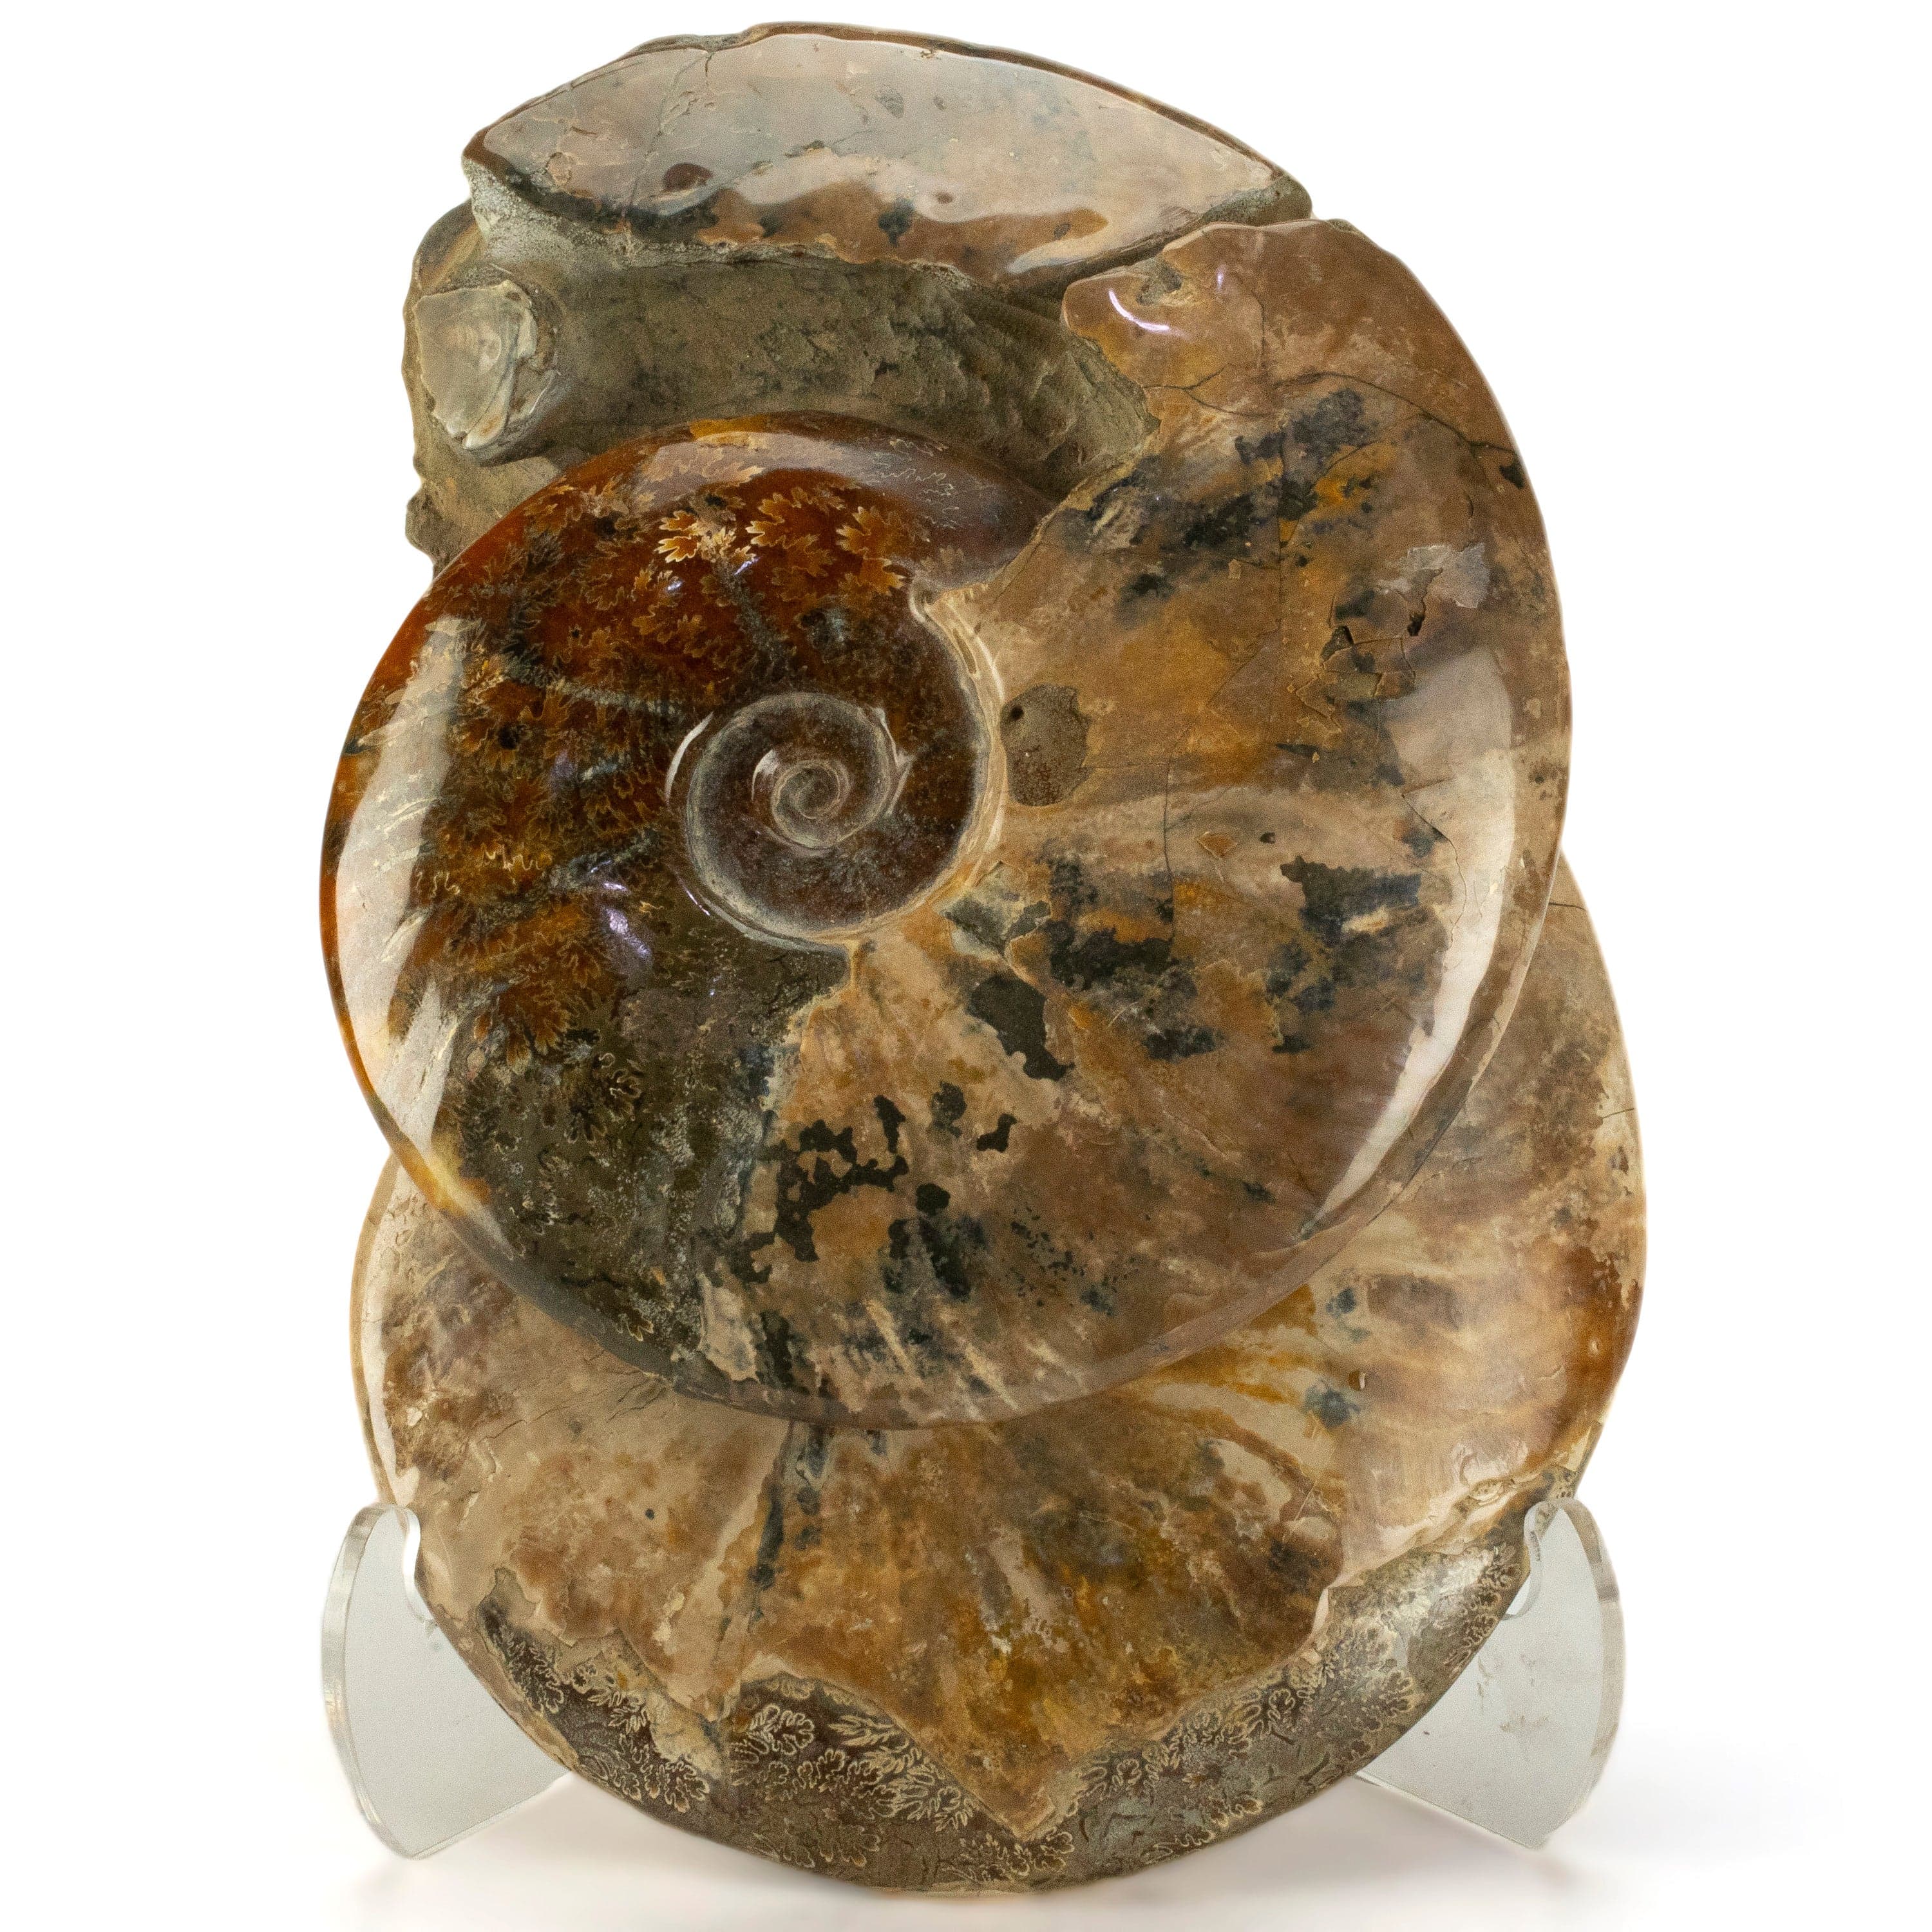 Kalifano Ammonites Natural Opalized Ammonite Twins from Madagascar - 11" / 11 lbs AMM6000.001